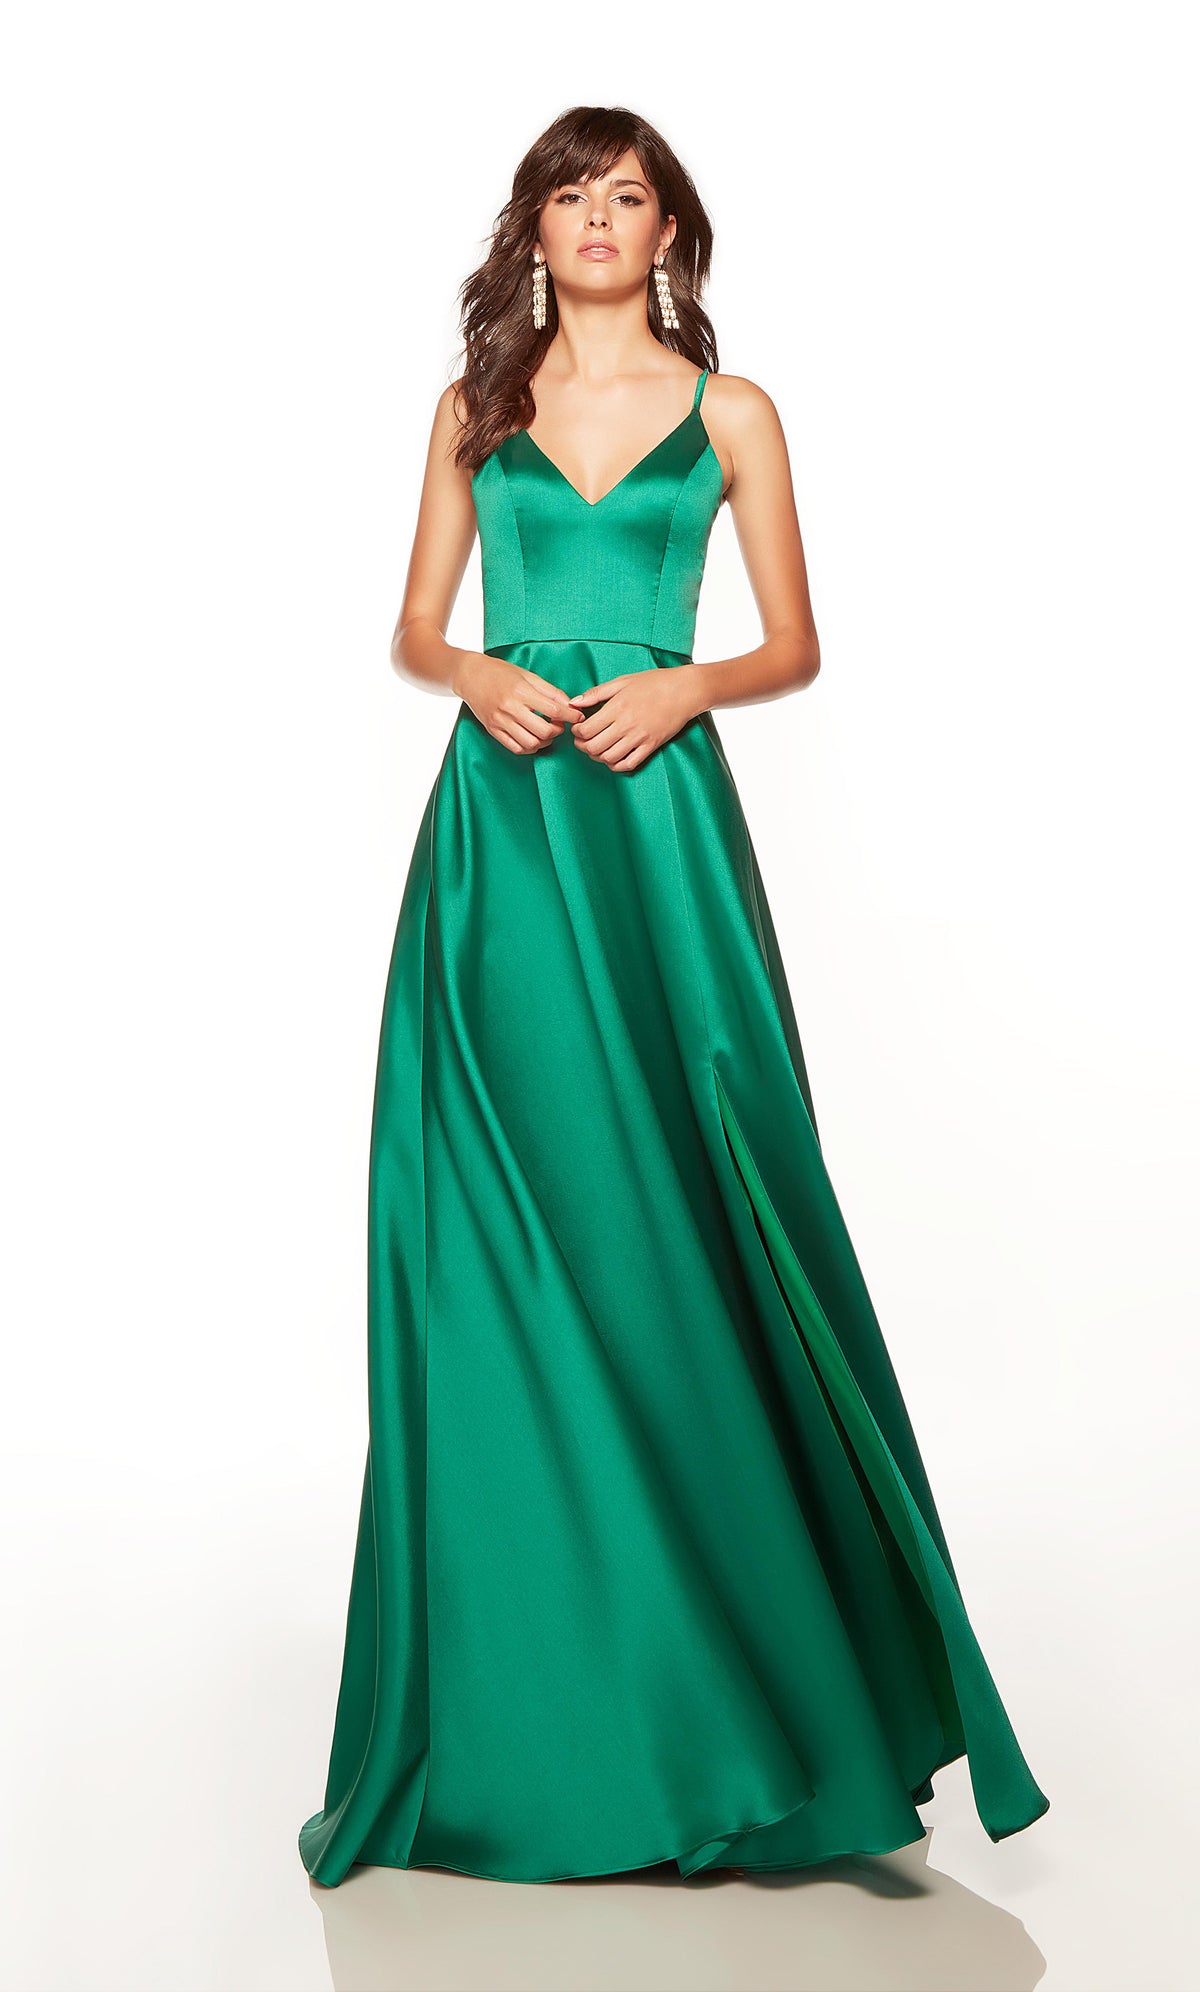 Plus size prom dress with a V neckline and side slit in pine green.